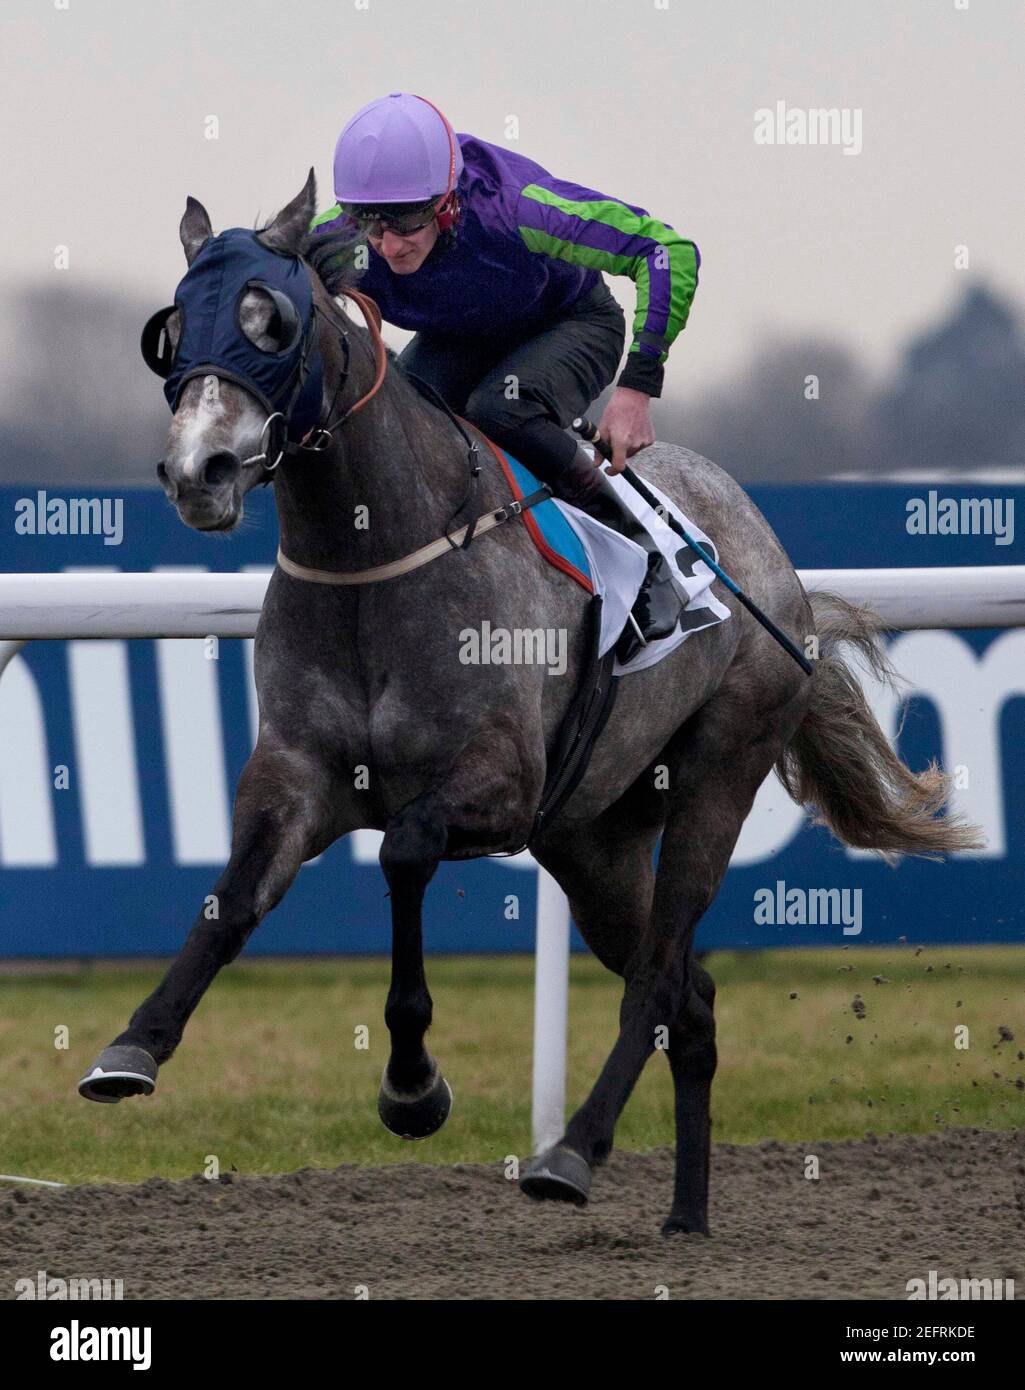 Horse Racing - Kempton - Kempton Park Racecourse - 8/2/12  Silver Linnet ridden by Adam Kirby wins the 14.20 Free Entry For Betdaq Members Handicap Stakes  Mandatory Credit: Action Images / Julian Herbert  Livepic Stock Photo